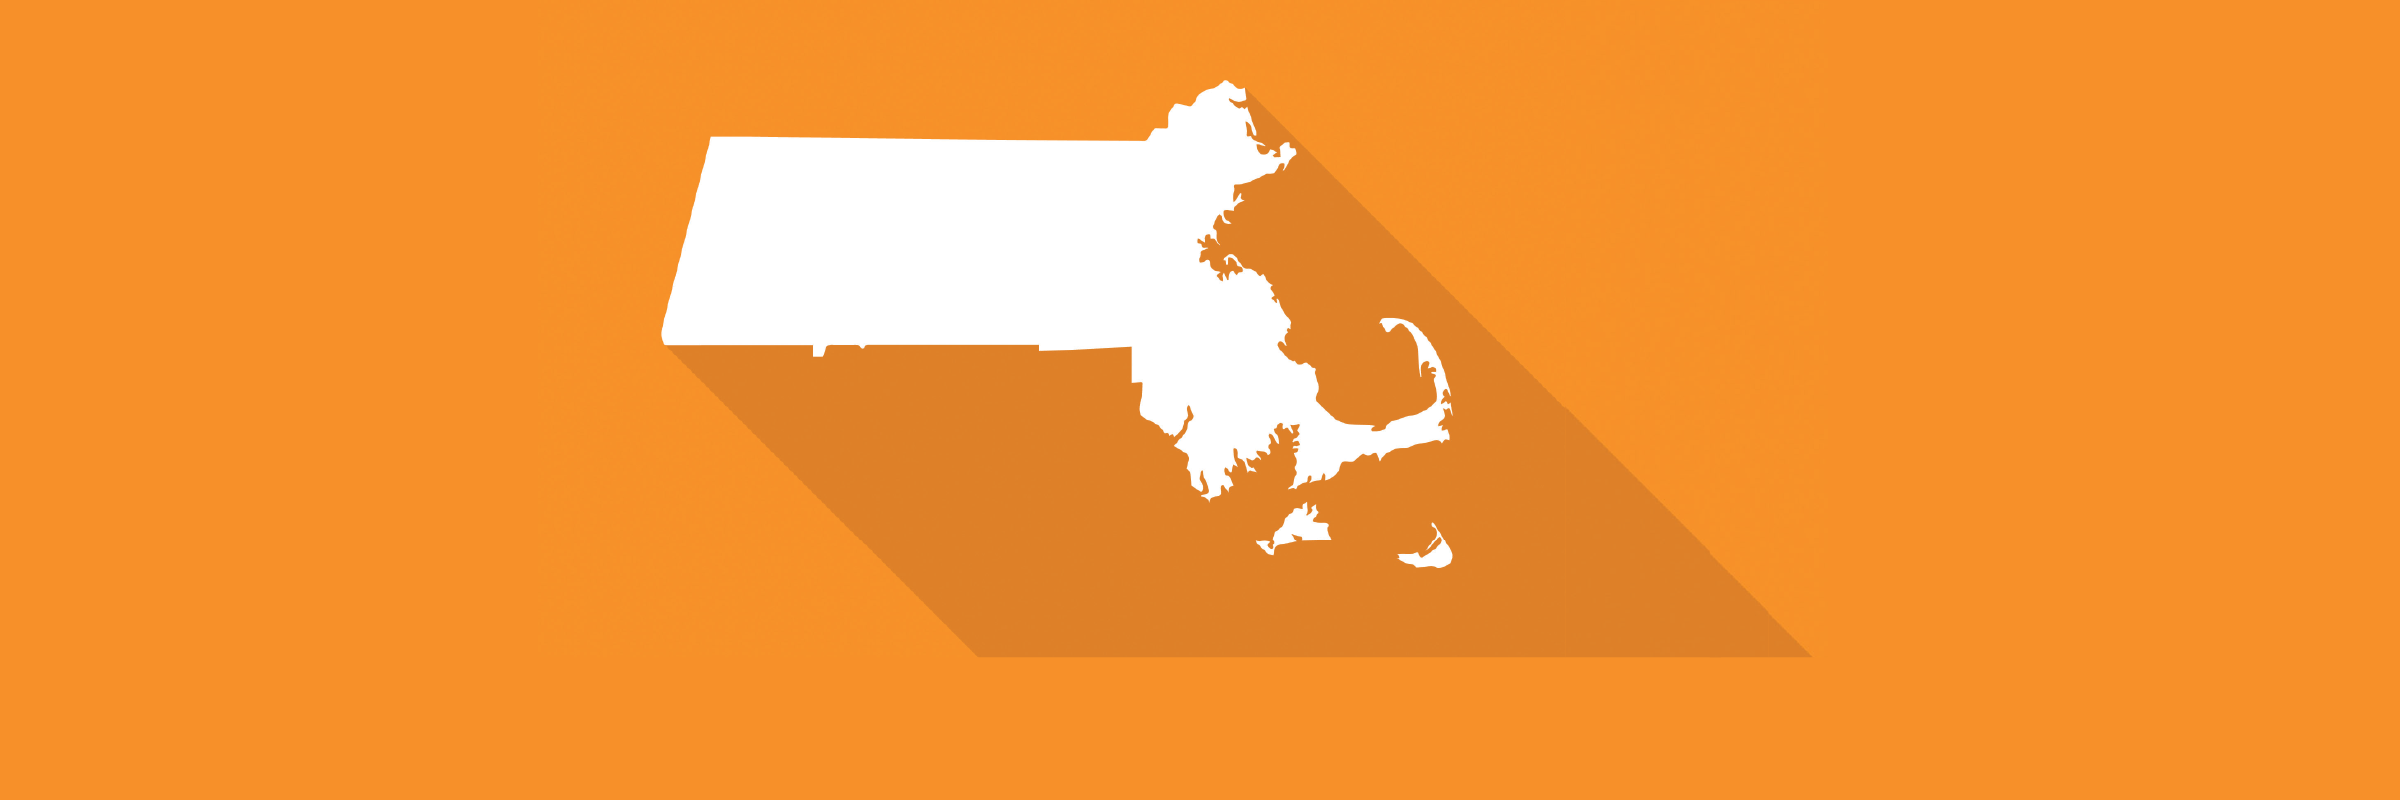 an image of the shape of the state of Massachusetts